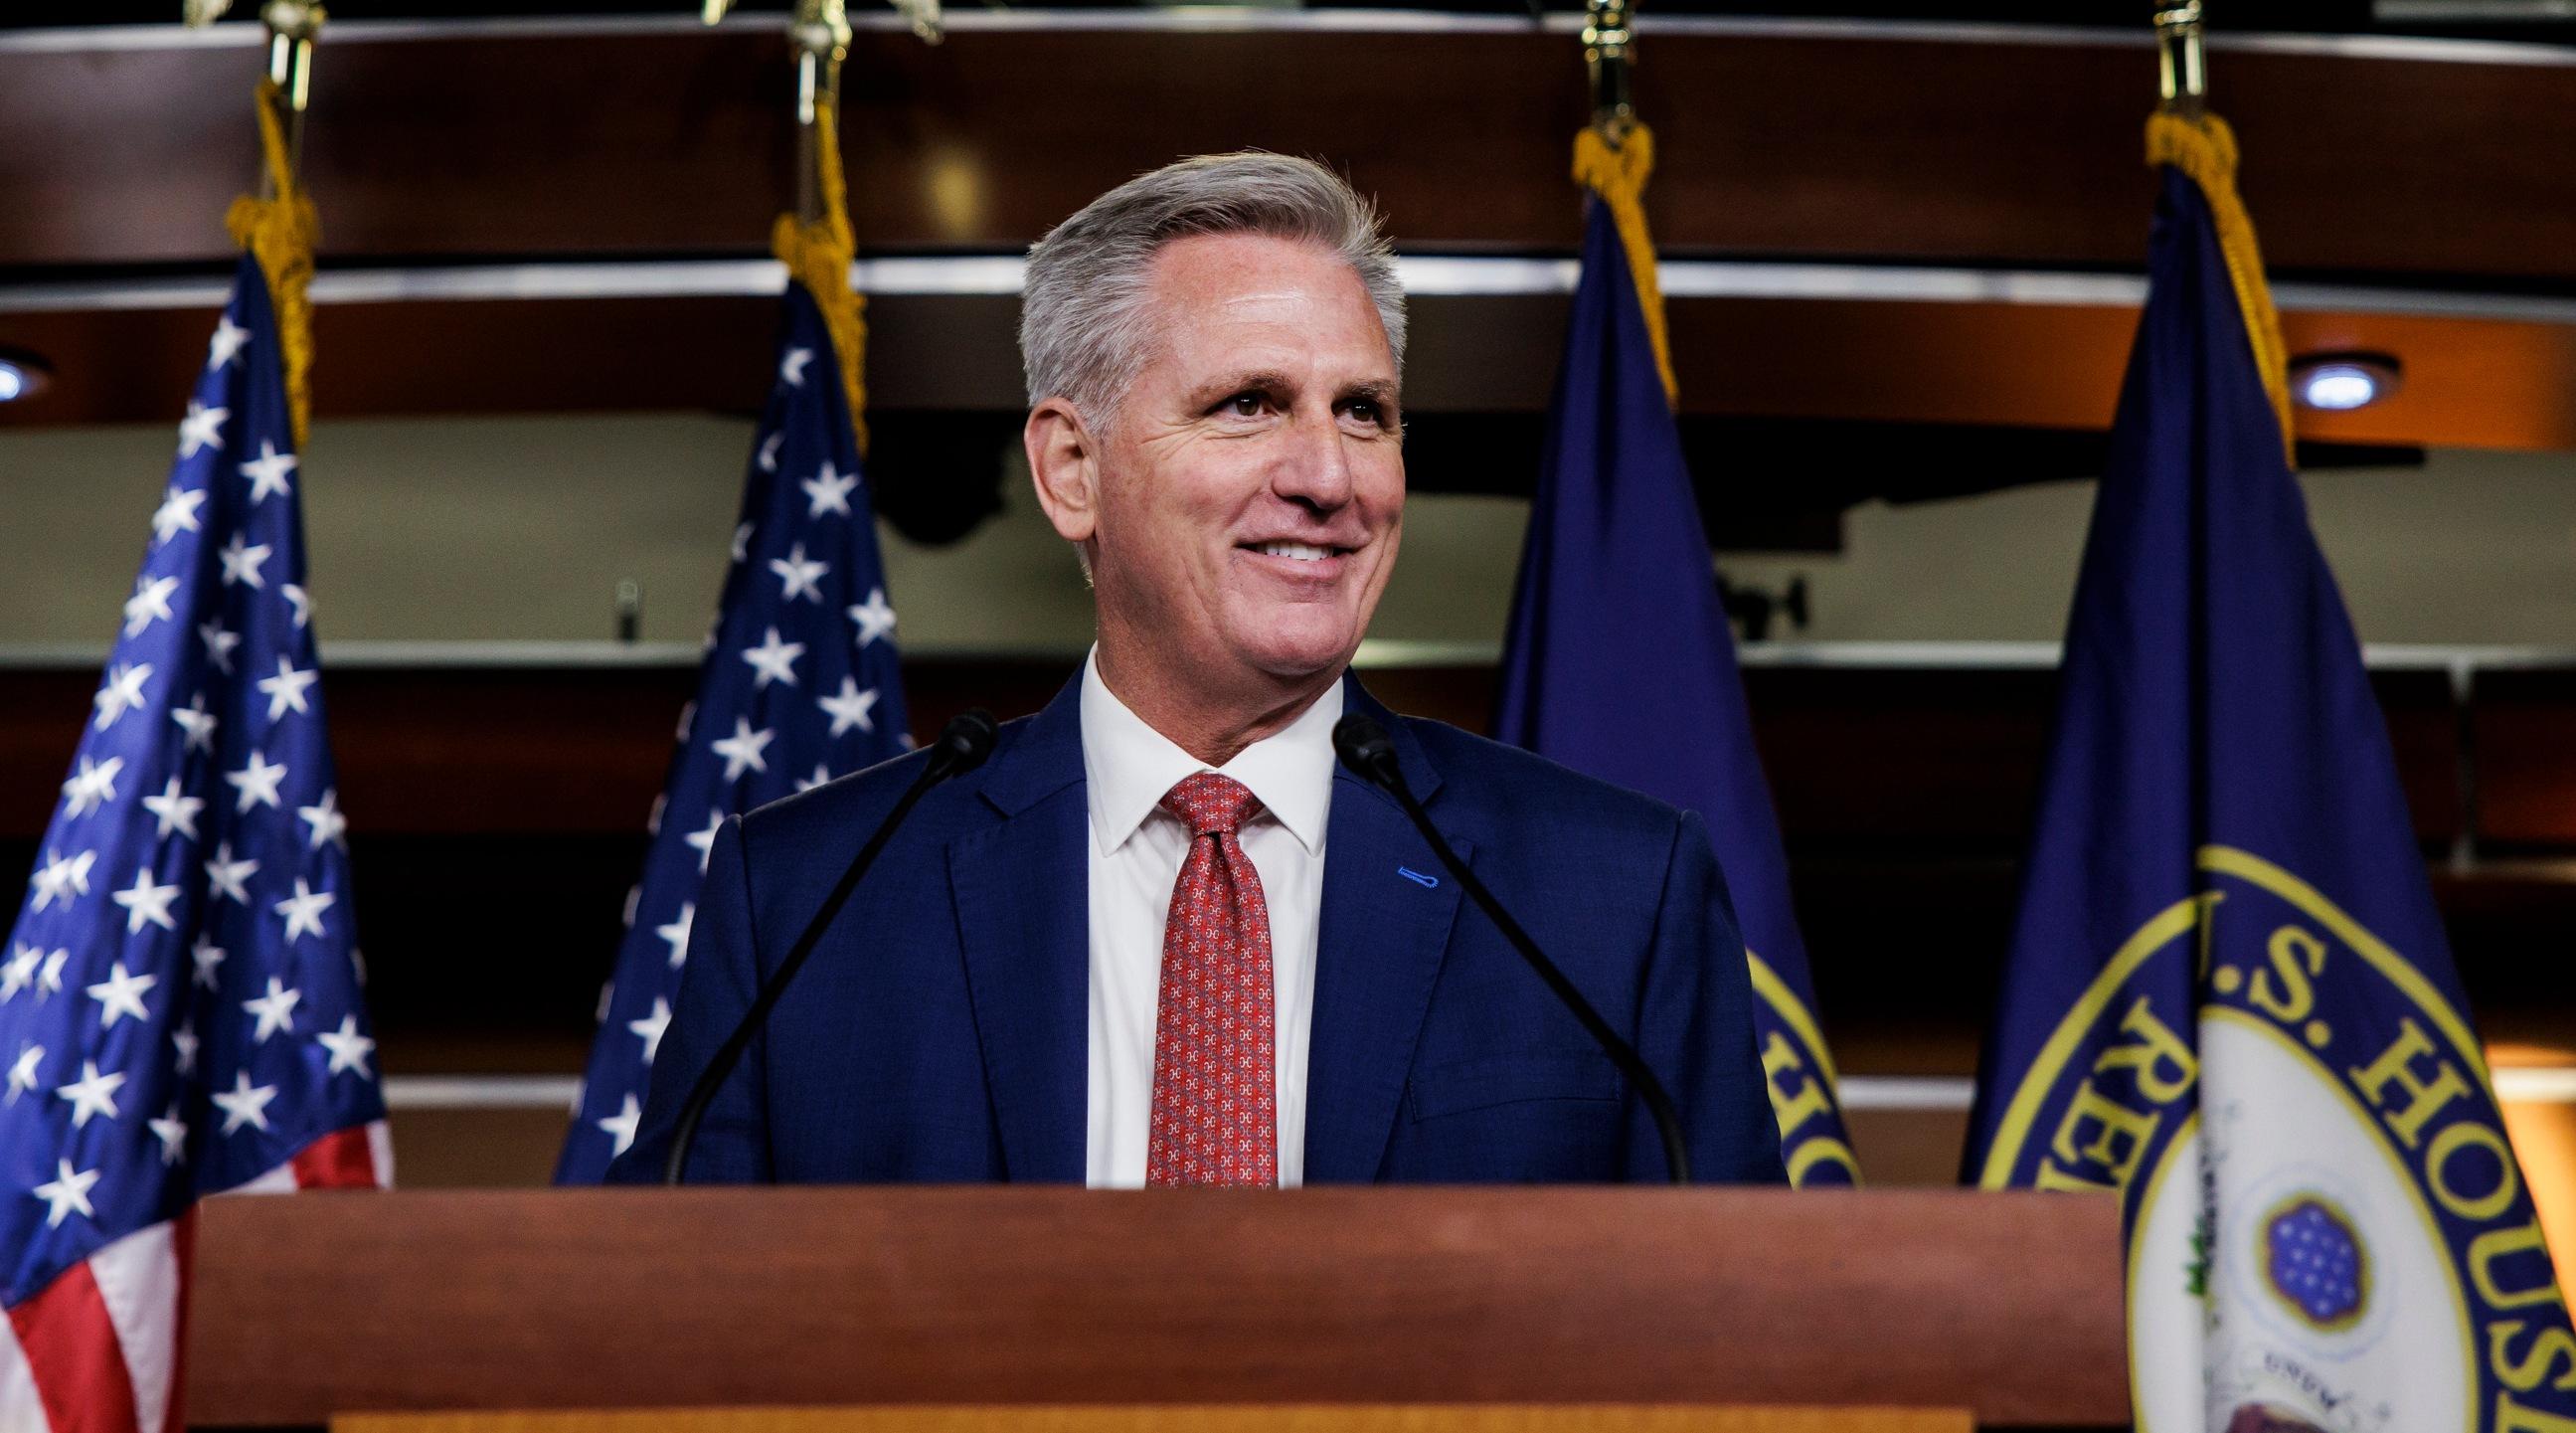  House Minority Leader Kevin McCarthy (R-CA) holds his weekly news conference in the Capitol Visitors Center at the U.S. Capitol building on October 28, 2021